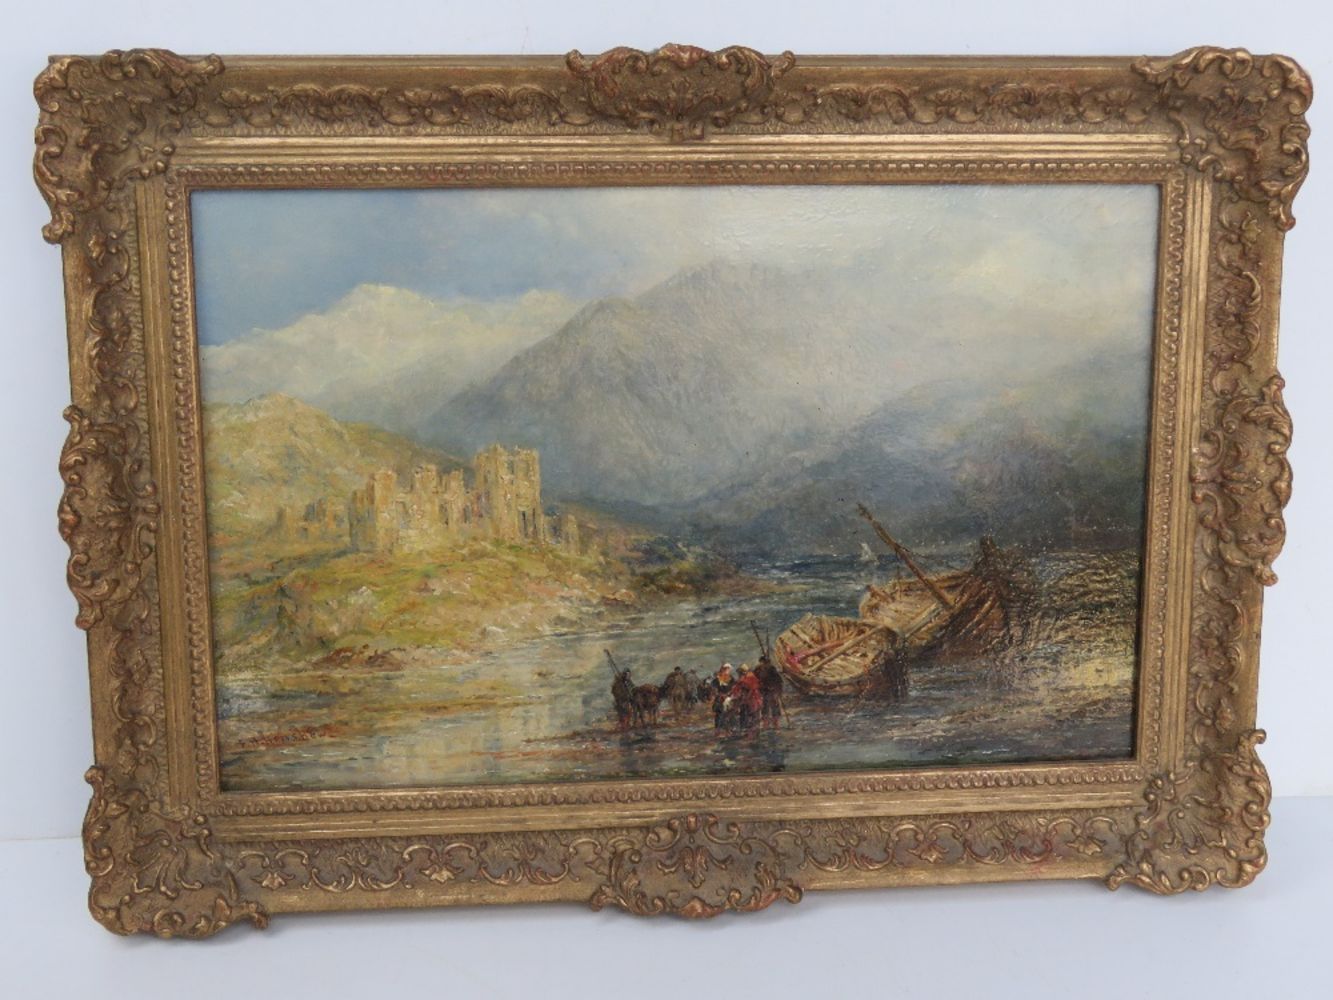 Antiques, Furniture, Paintings and Decorative Items - Online Only Timed Auction